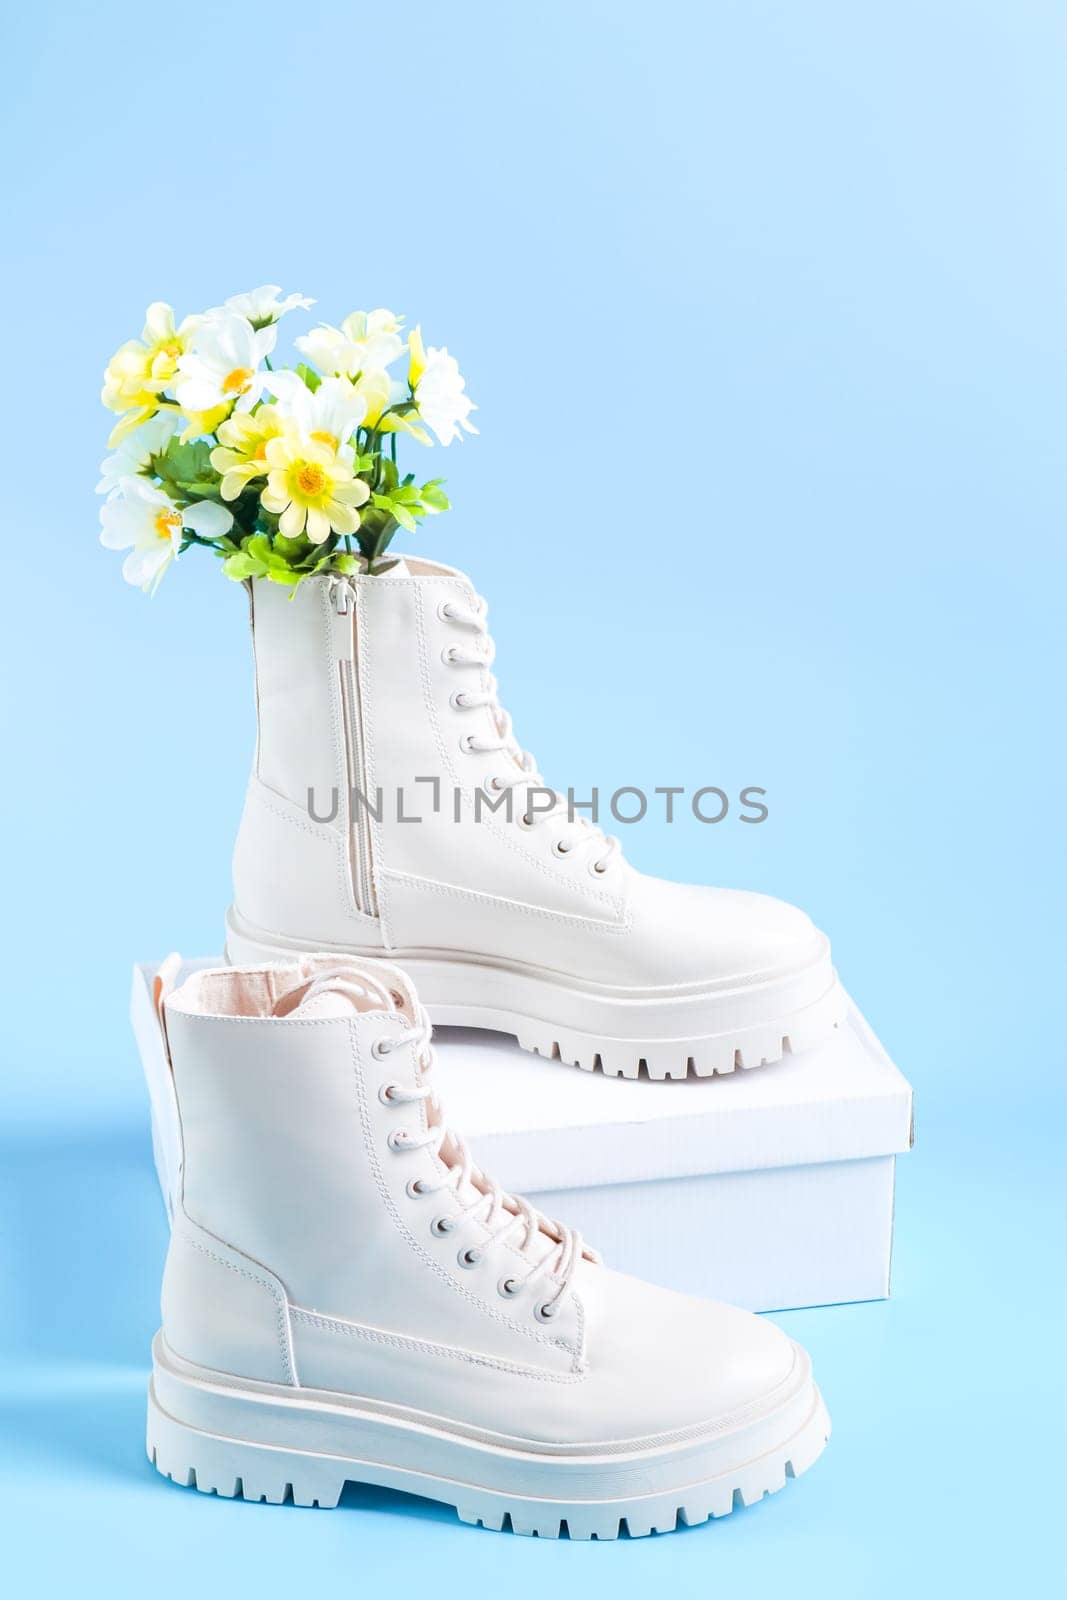 White demi-season martens boots made of eco-leather with a rough sole with a bouquet of spring flowers and a white cardboard box for shoes stand on a light blue background, close-up side view. The concept of women's shoes.